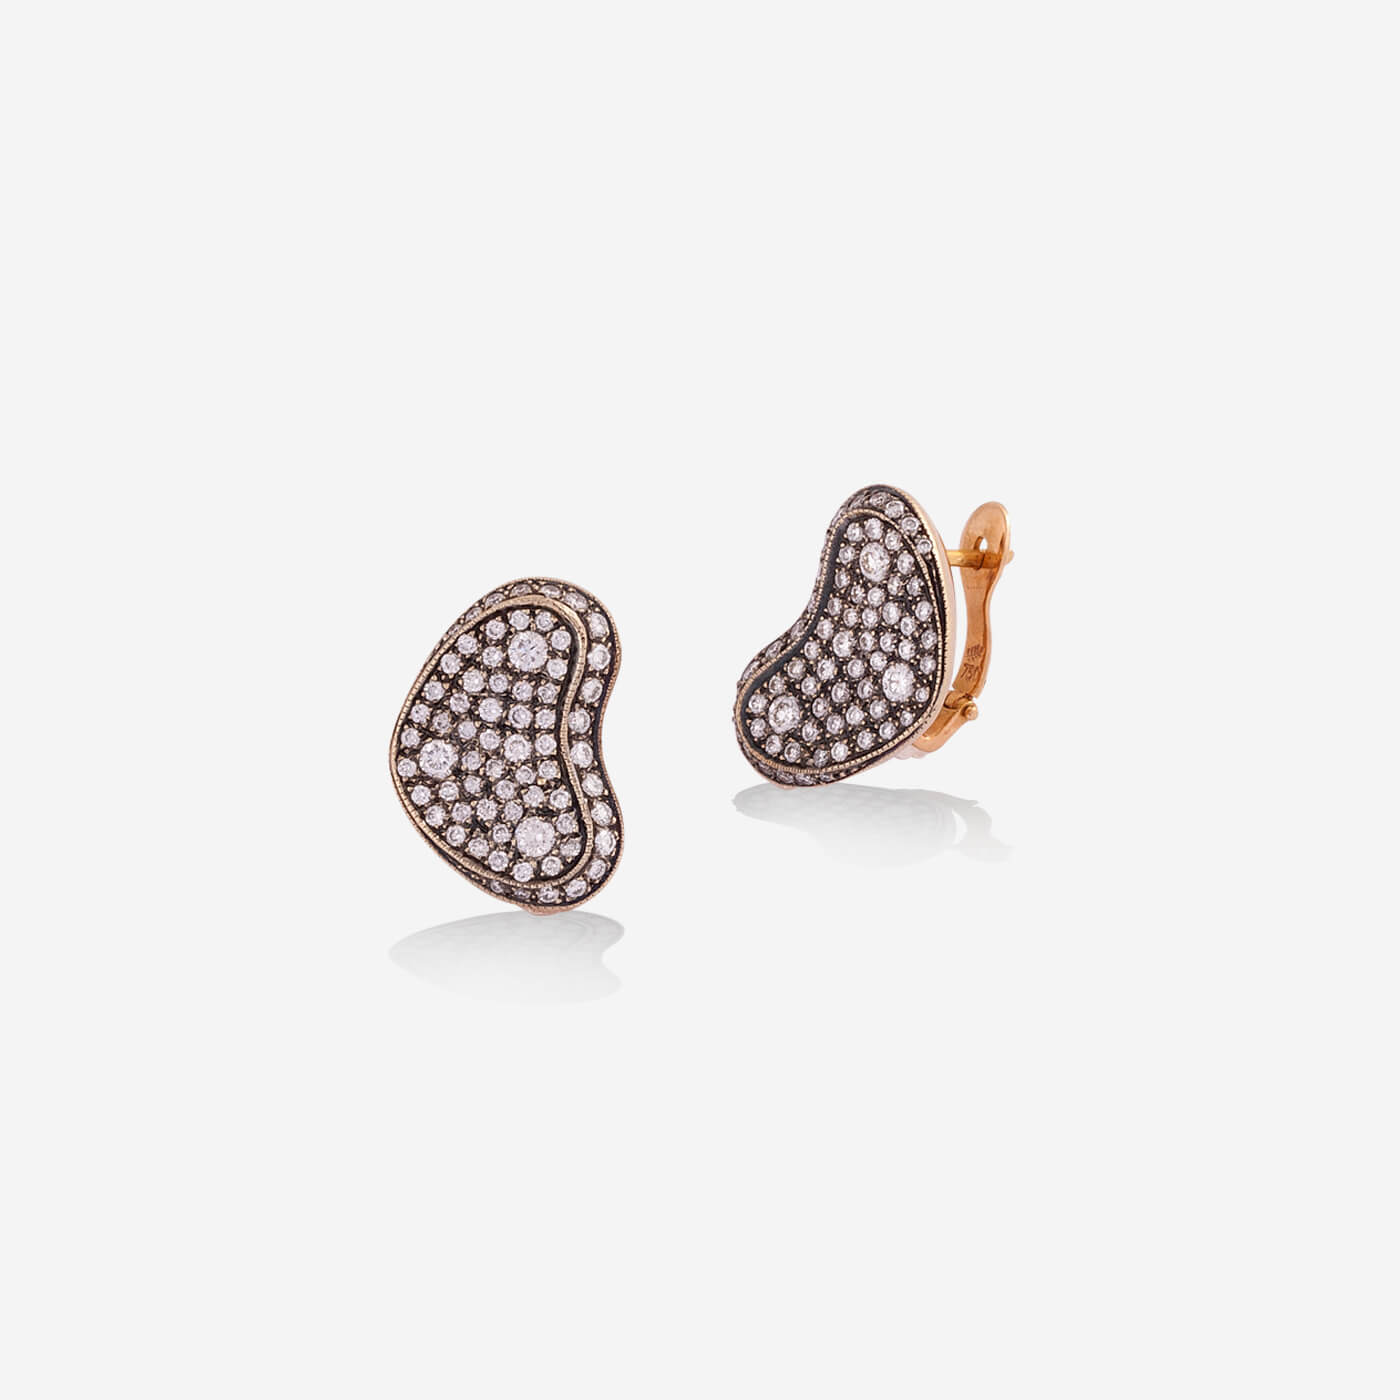 Yellow Gold With Diamonds Butterfly Earrings - Ref: RK00926